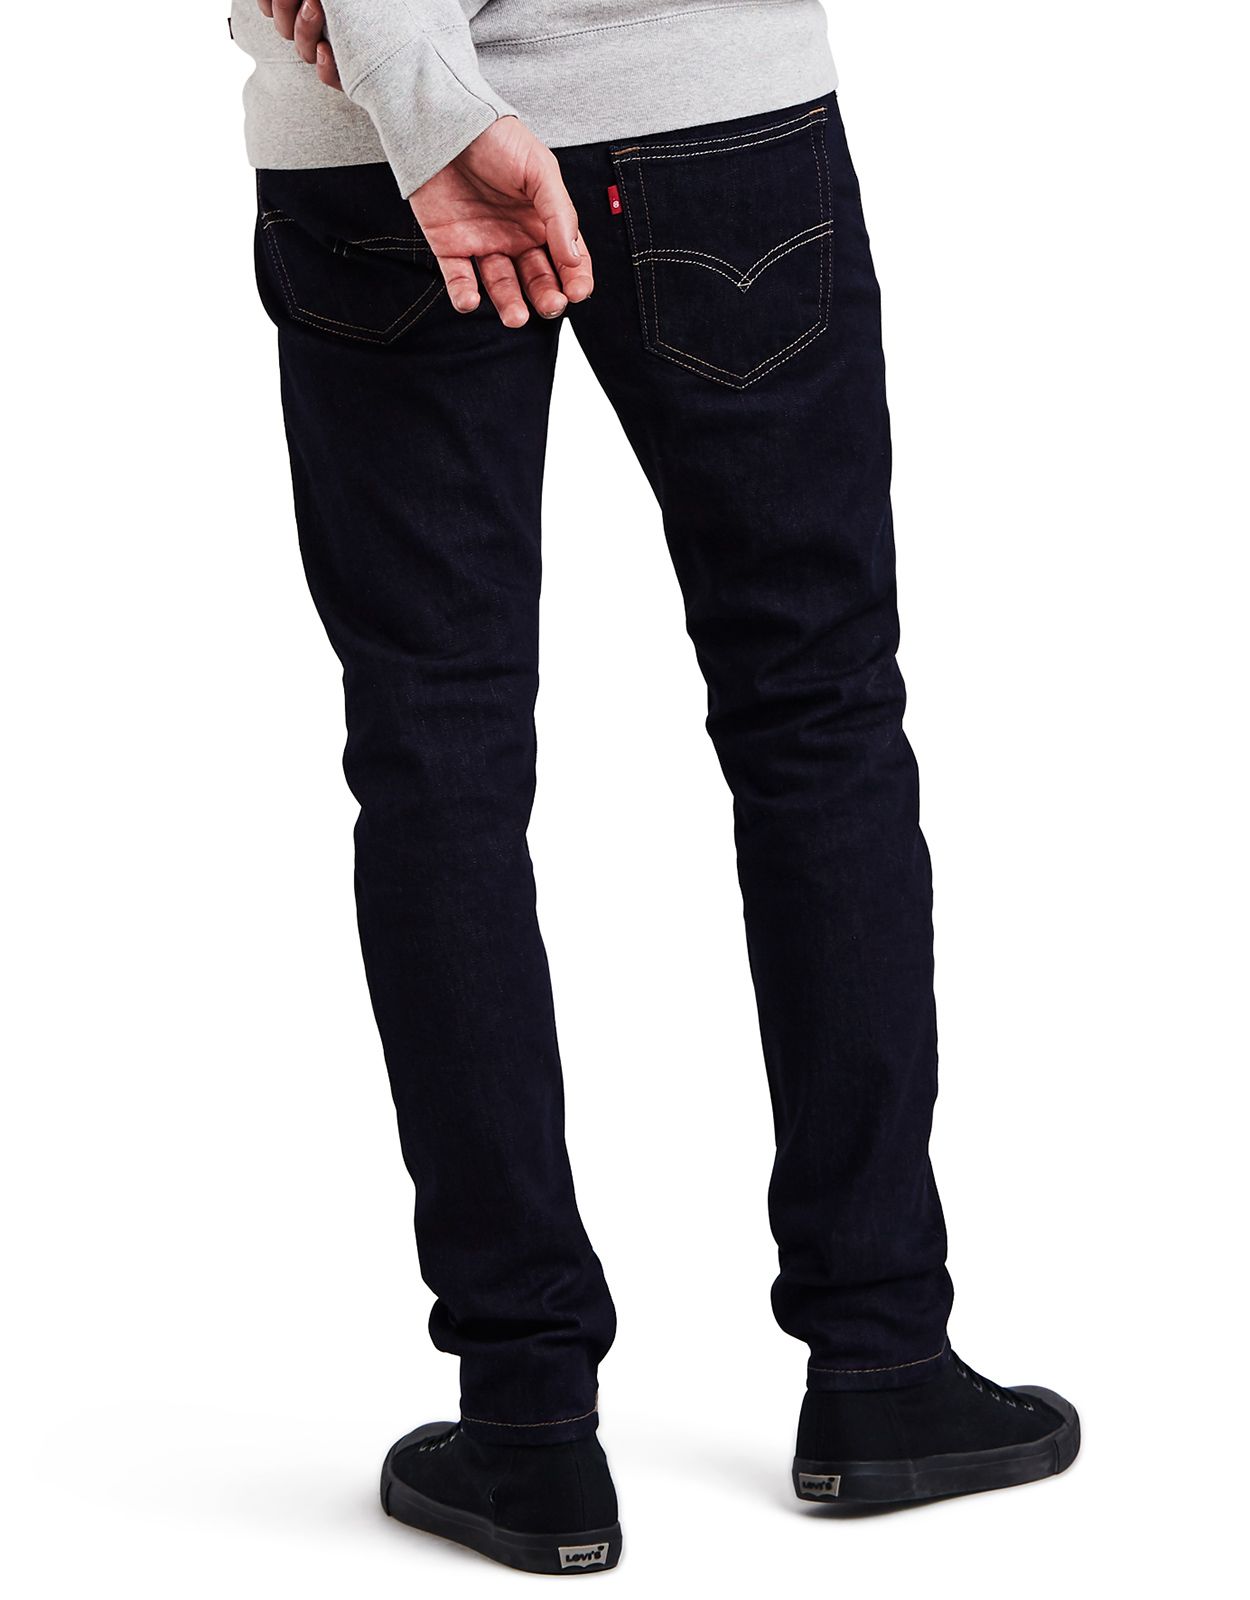 Levi's Men's 512 Stretch Low Rise Slim Fit Tapered Leg Jeans - Dark Hollow